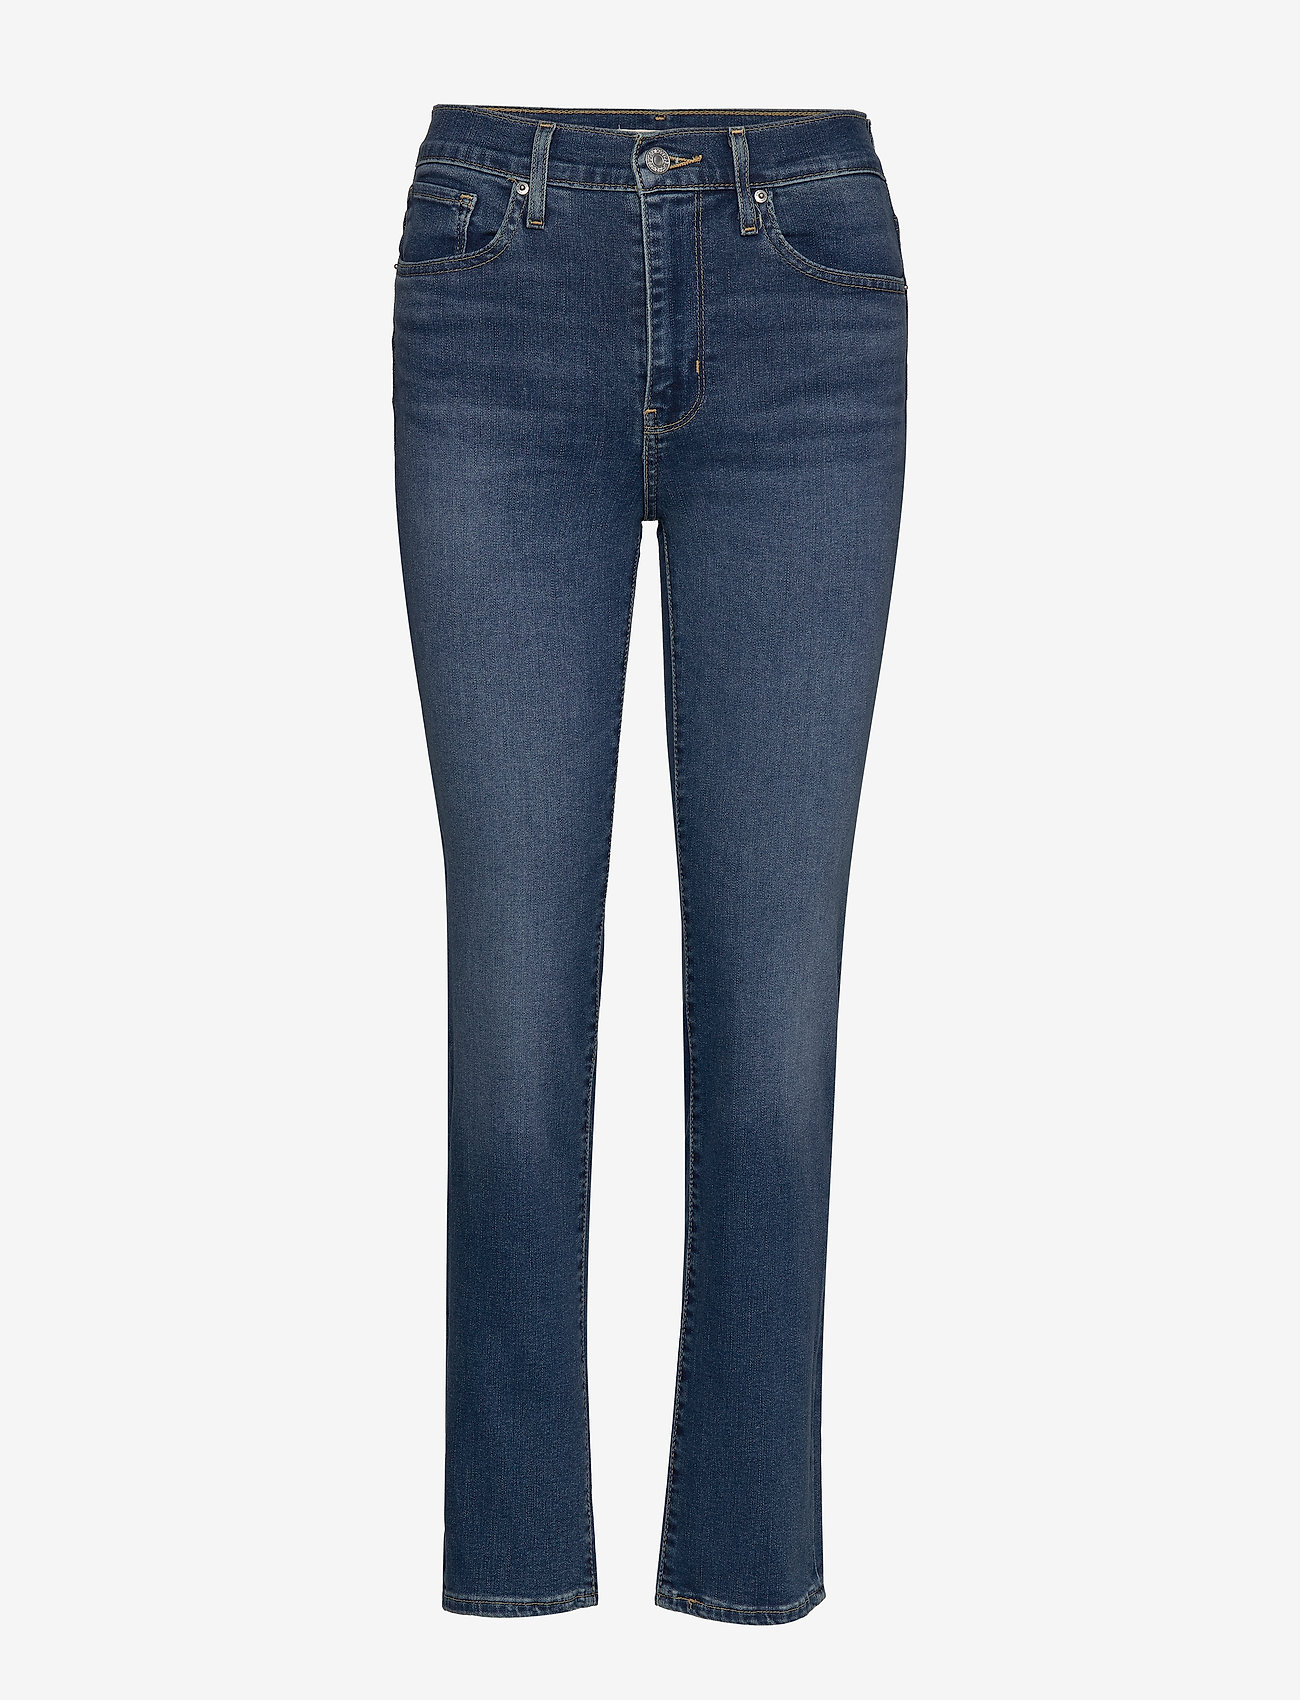 Buy > 724 high waisted straight jeans levi's > in stock